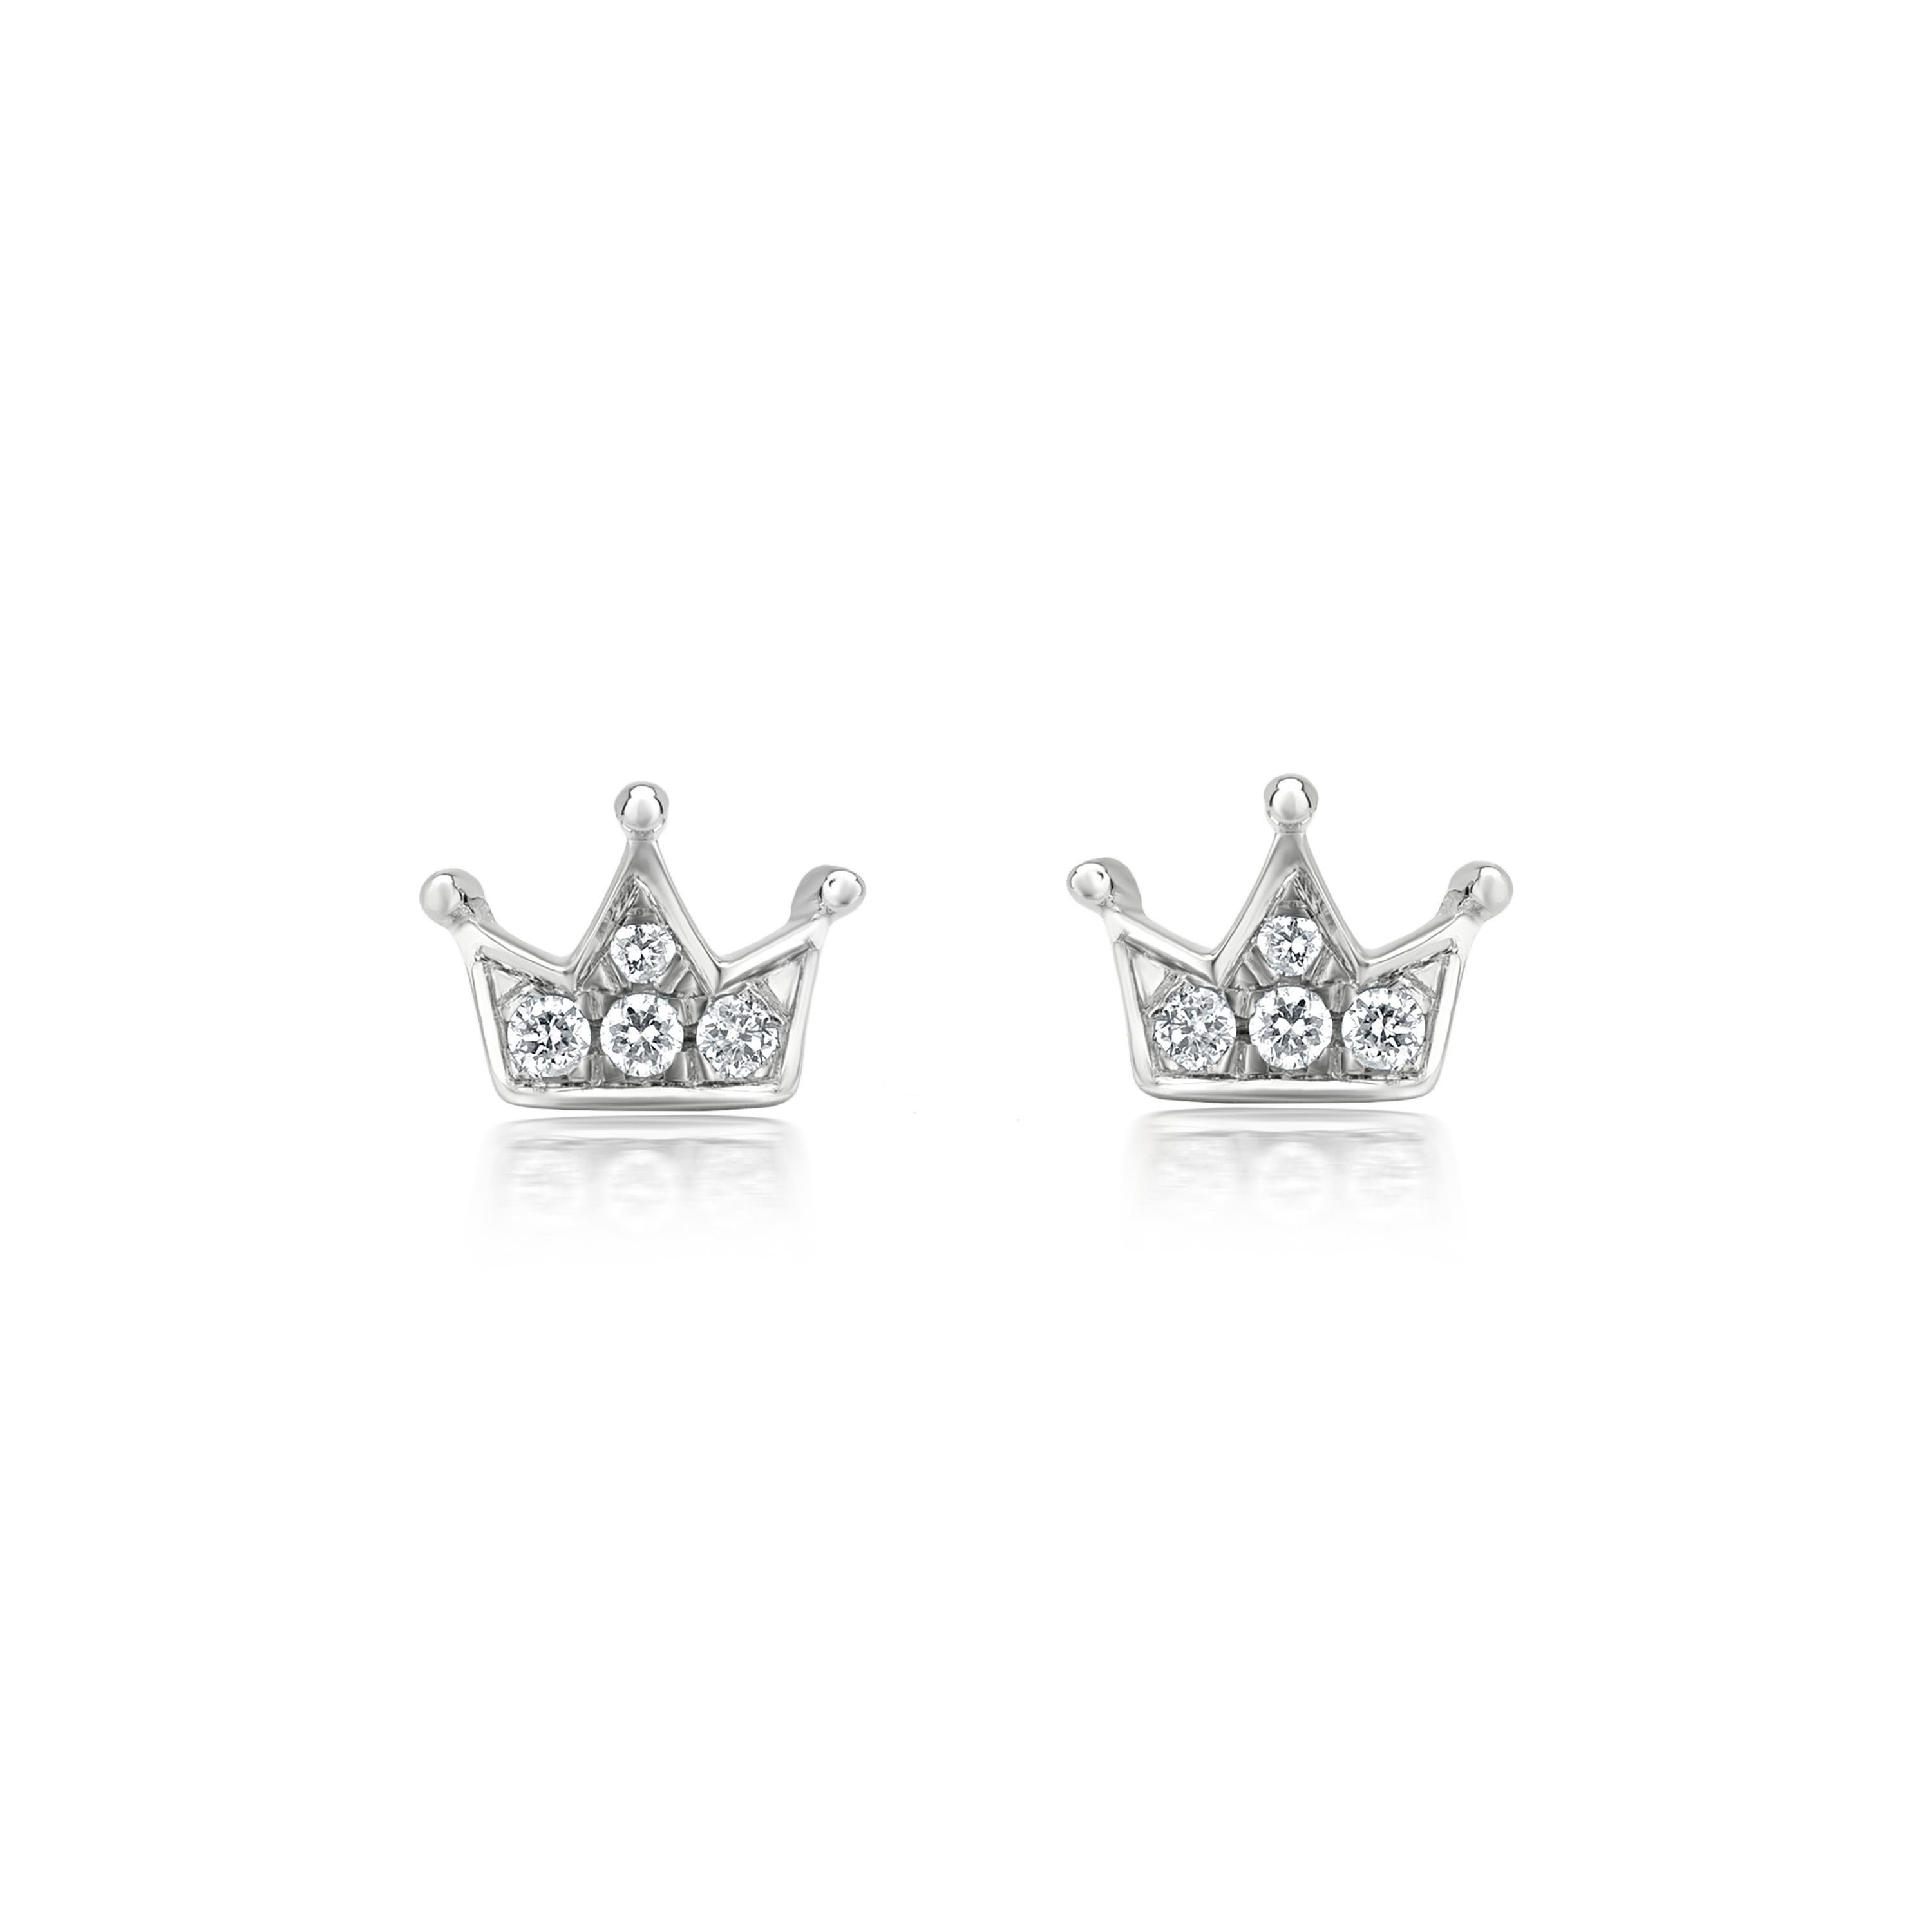 Carry a royal look with these Luxle crown stud earrings. Subtle yet pretty this crown stud earrings are a new fashion statement.  These studs are crafted with 8 round cut diamonds, totaling 0.10Cts adorned in crown motifs. These stud earrings are